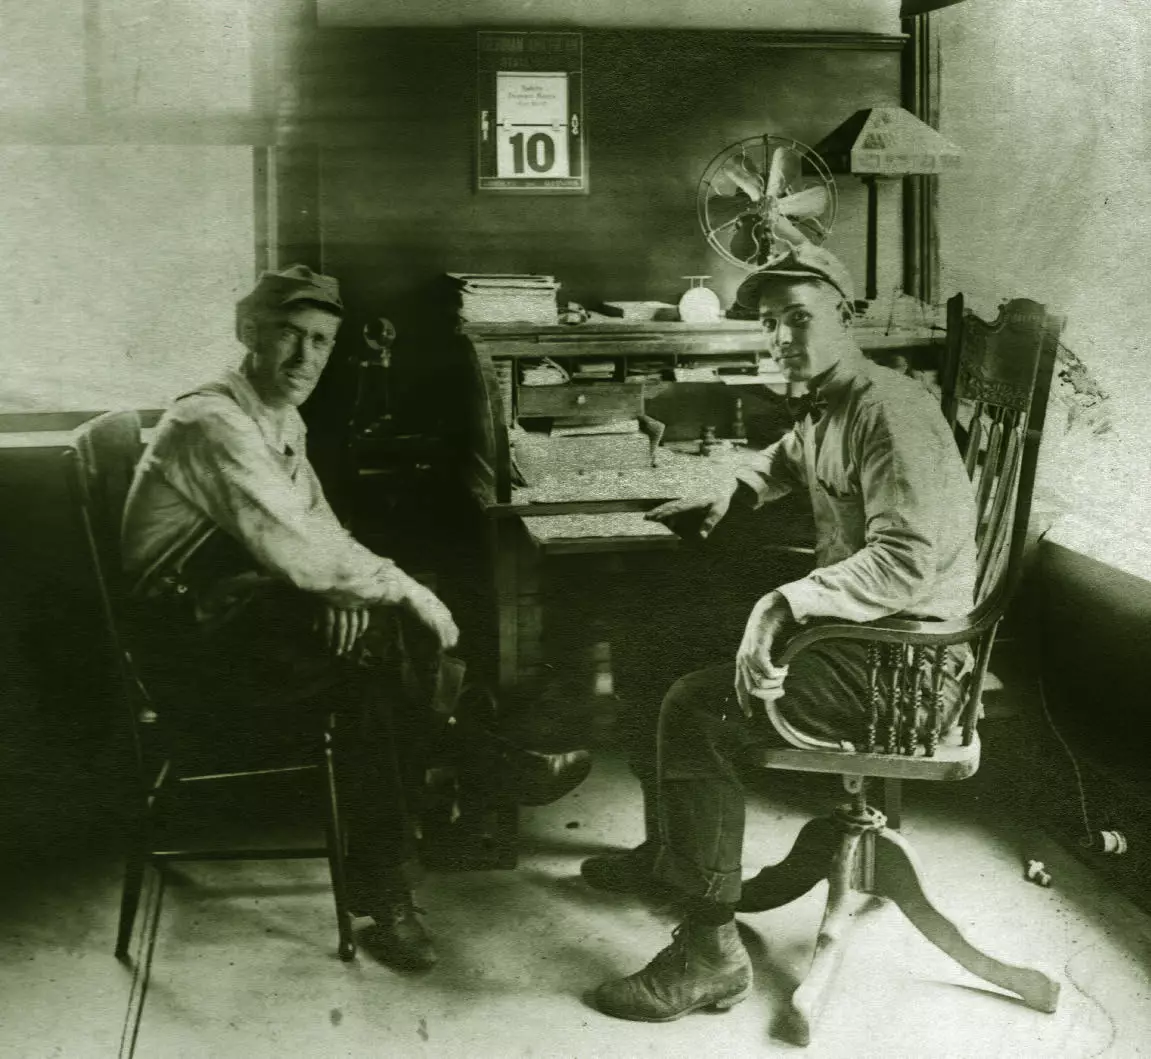 Two men seated in wooden chairs are a desk. They are looking at the camera. The desk has a fan, lamp, and some drawers.